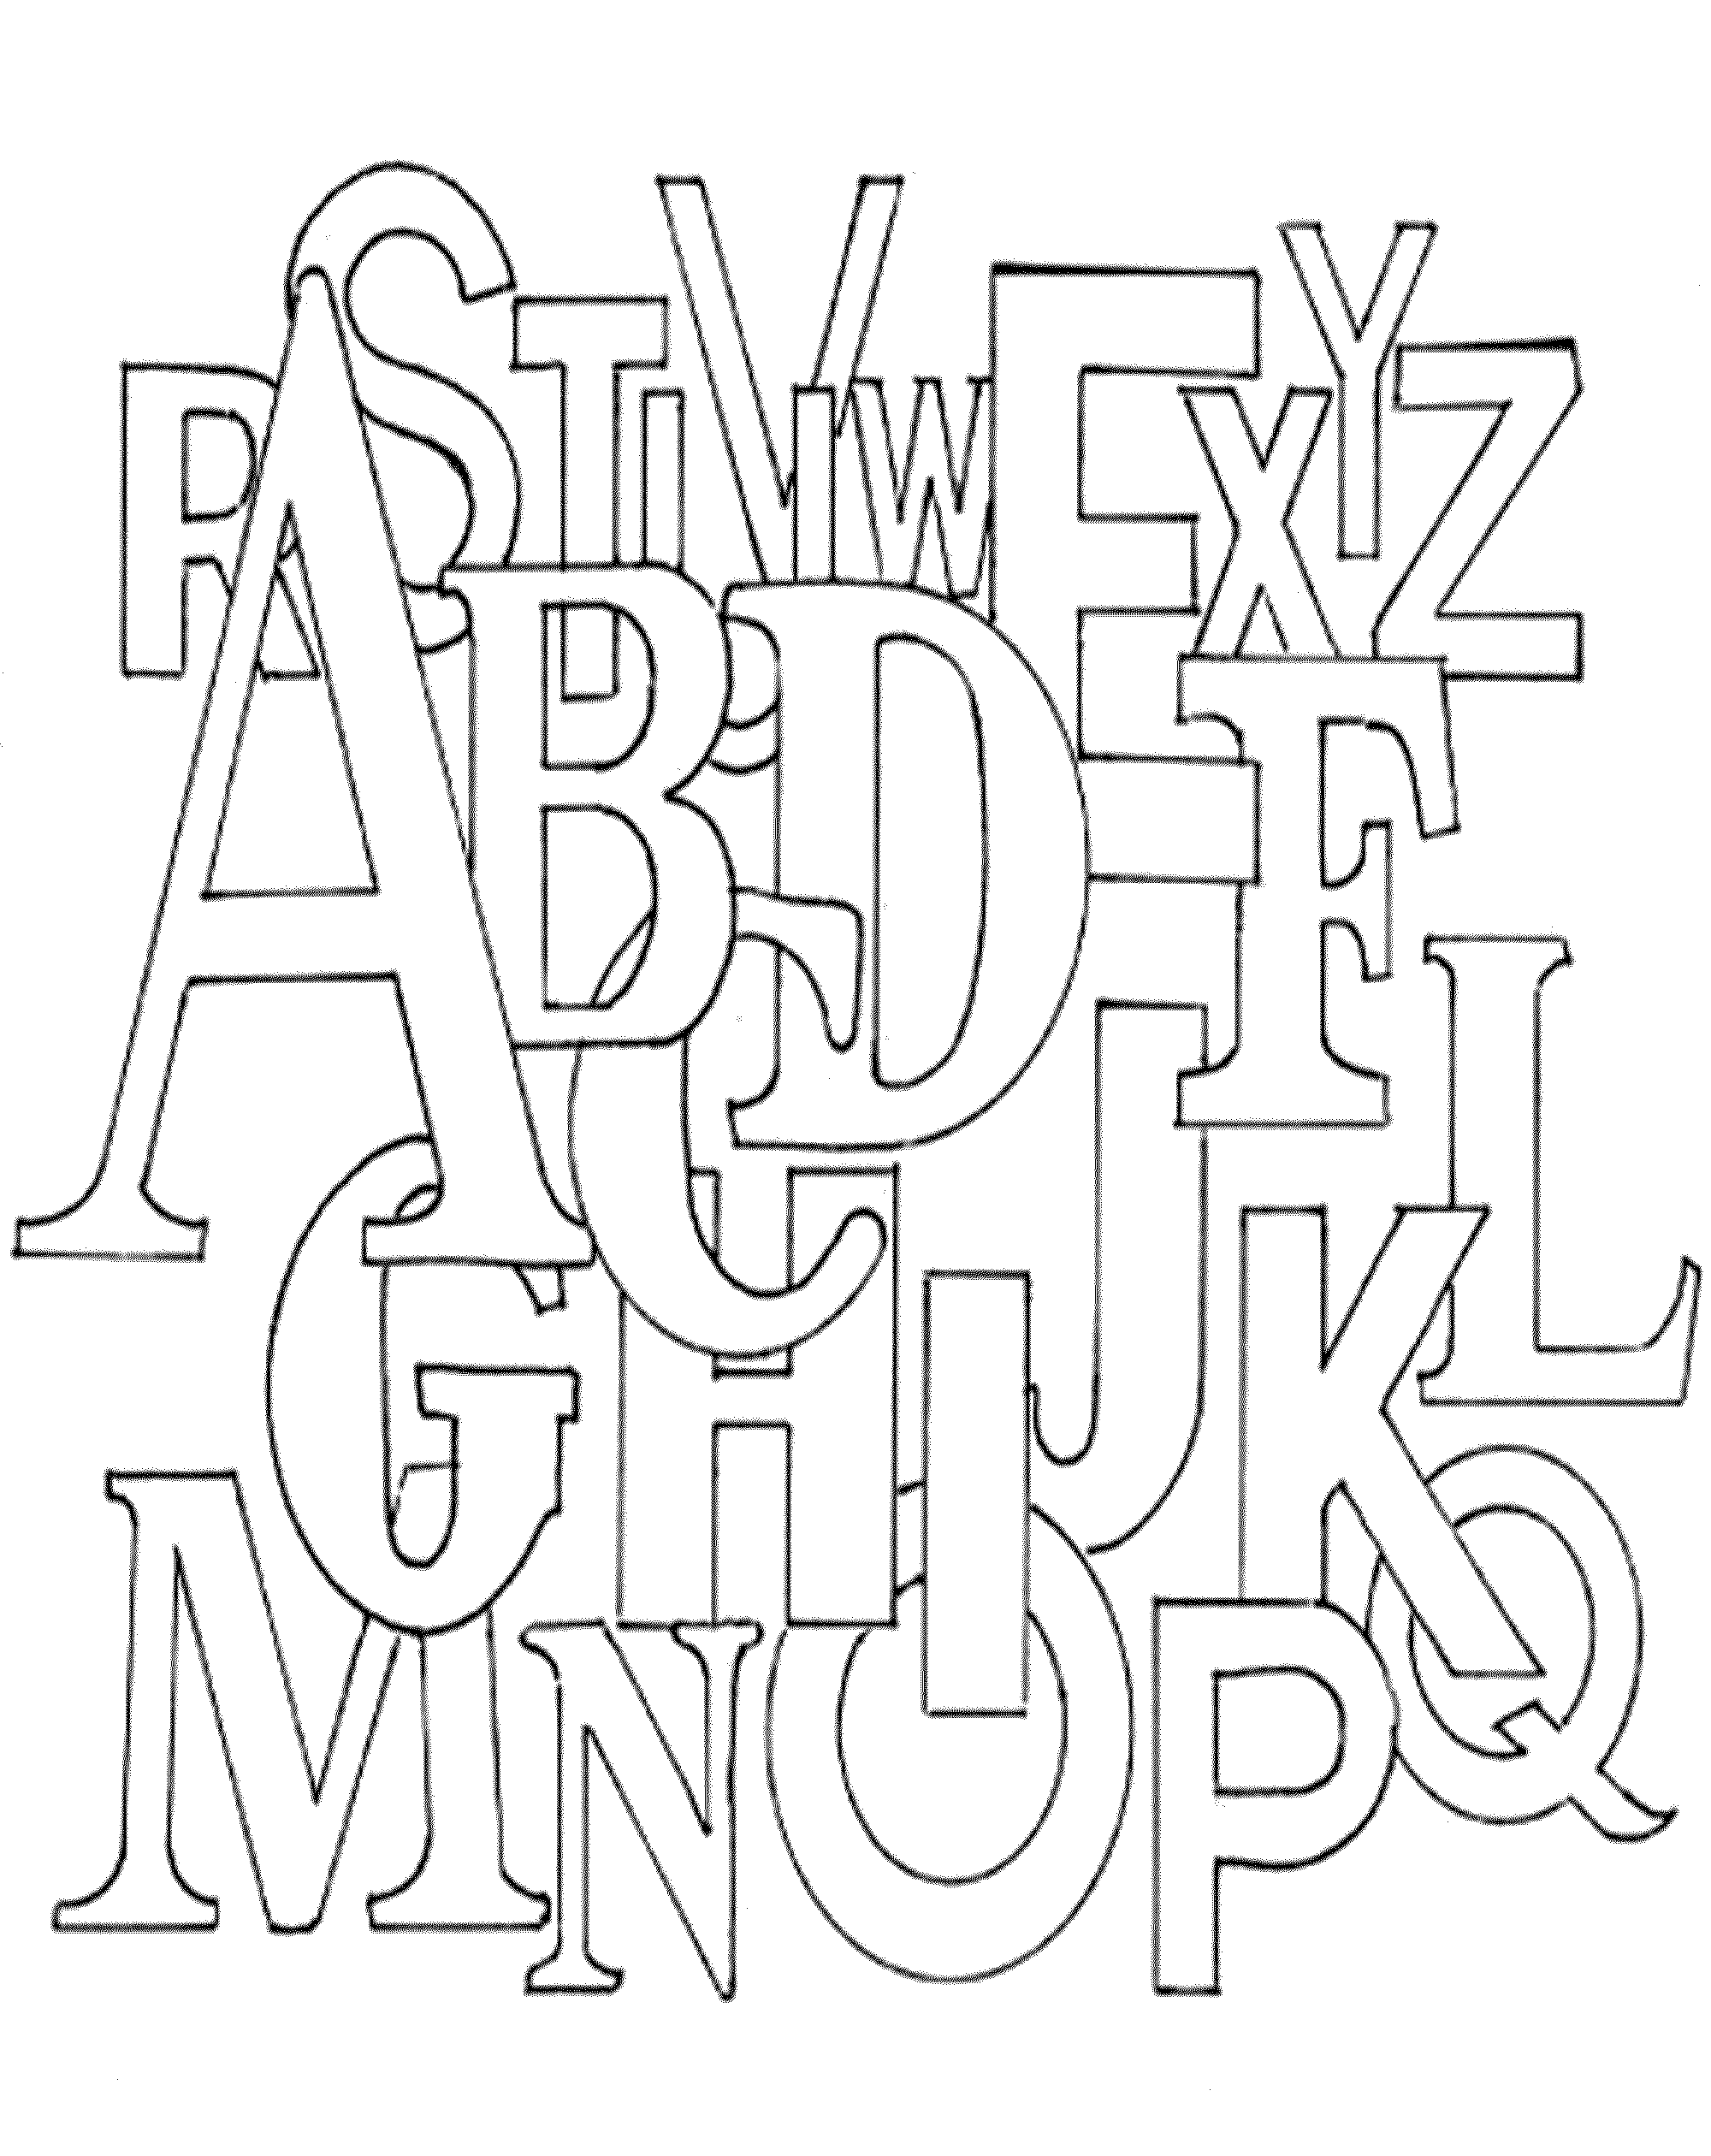 be-creative-with-abc-coloring-pages